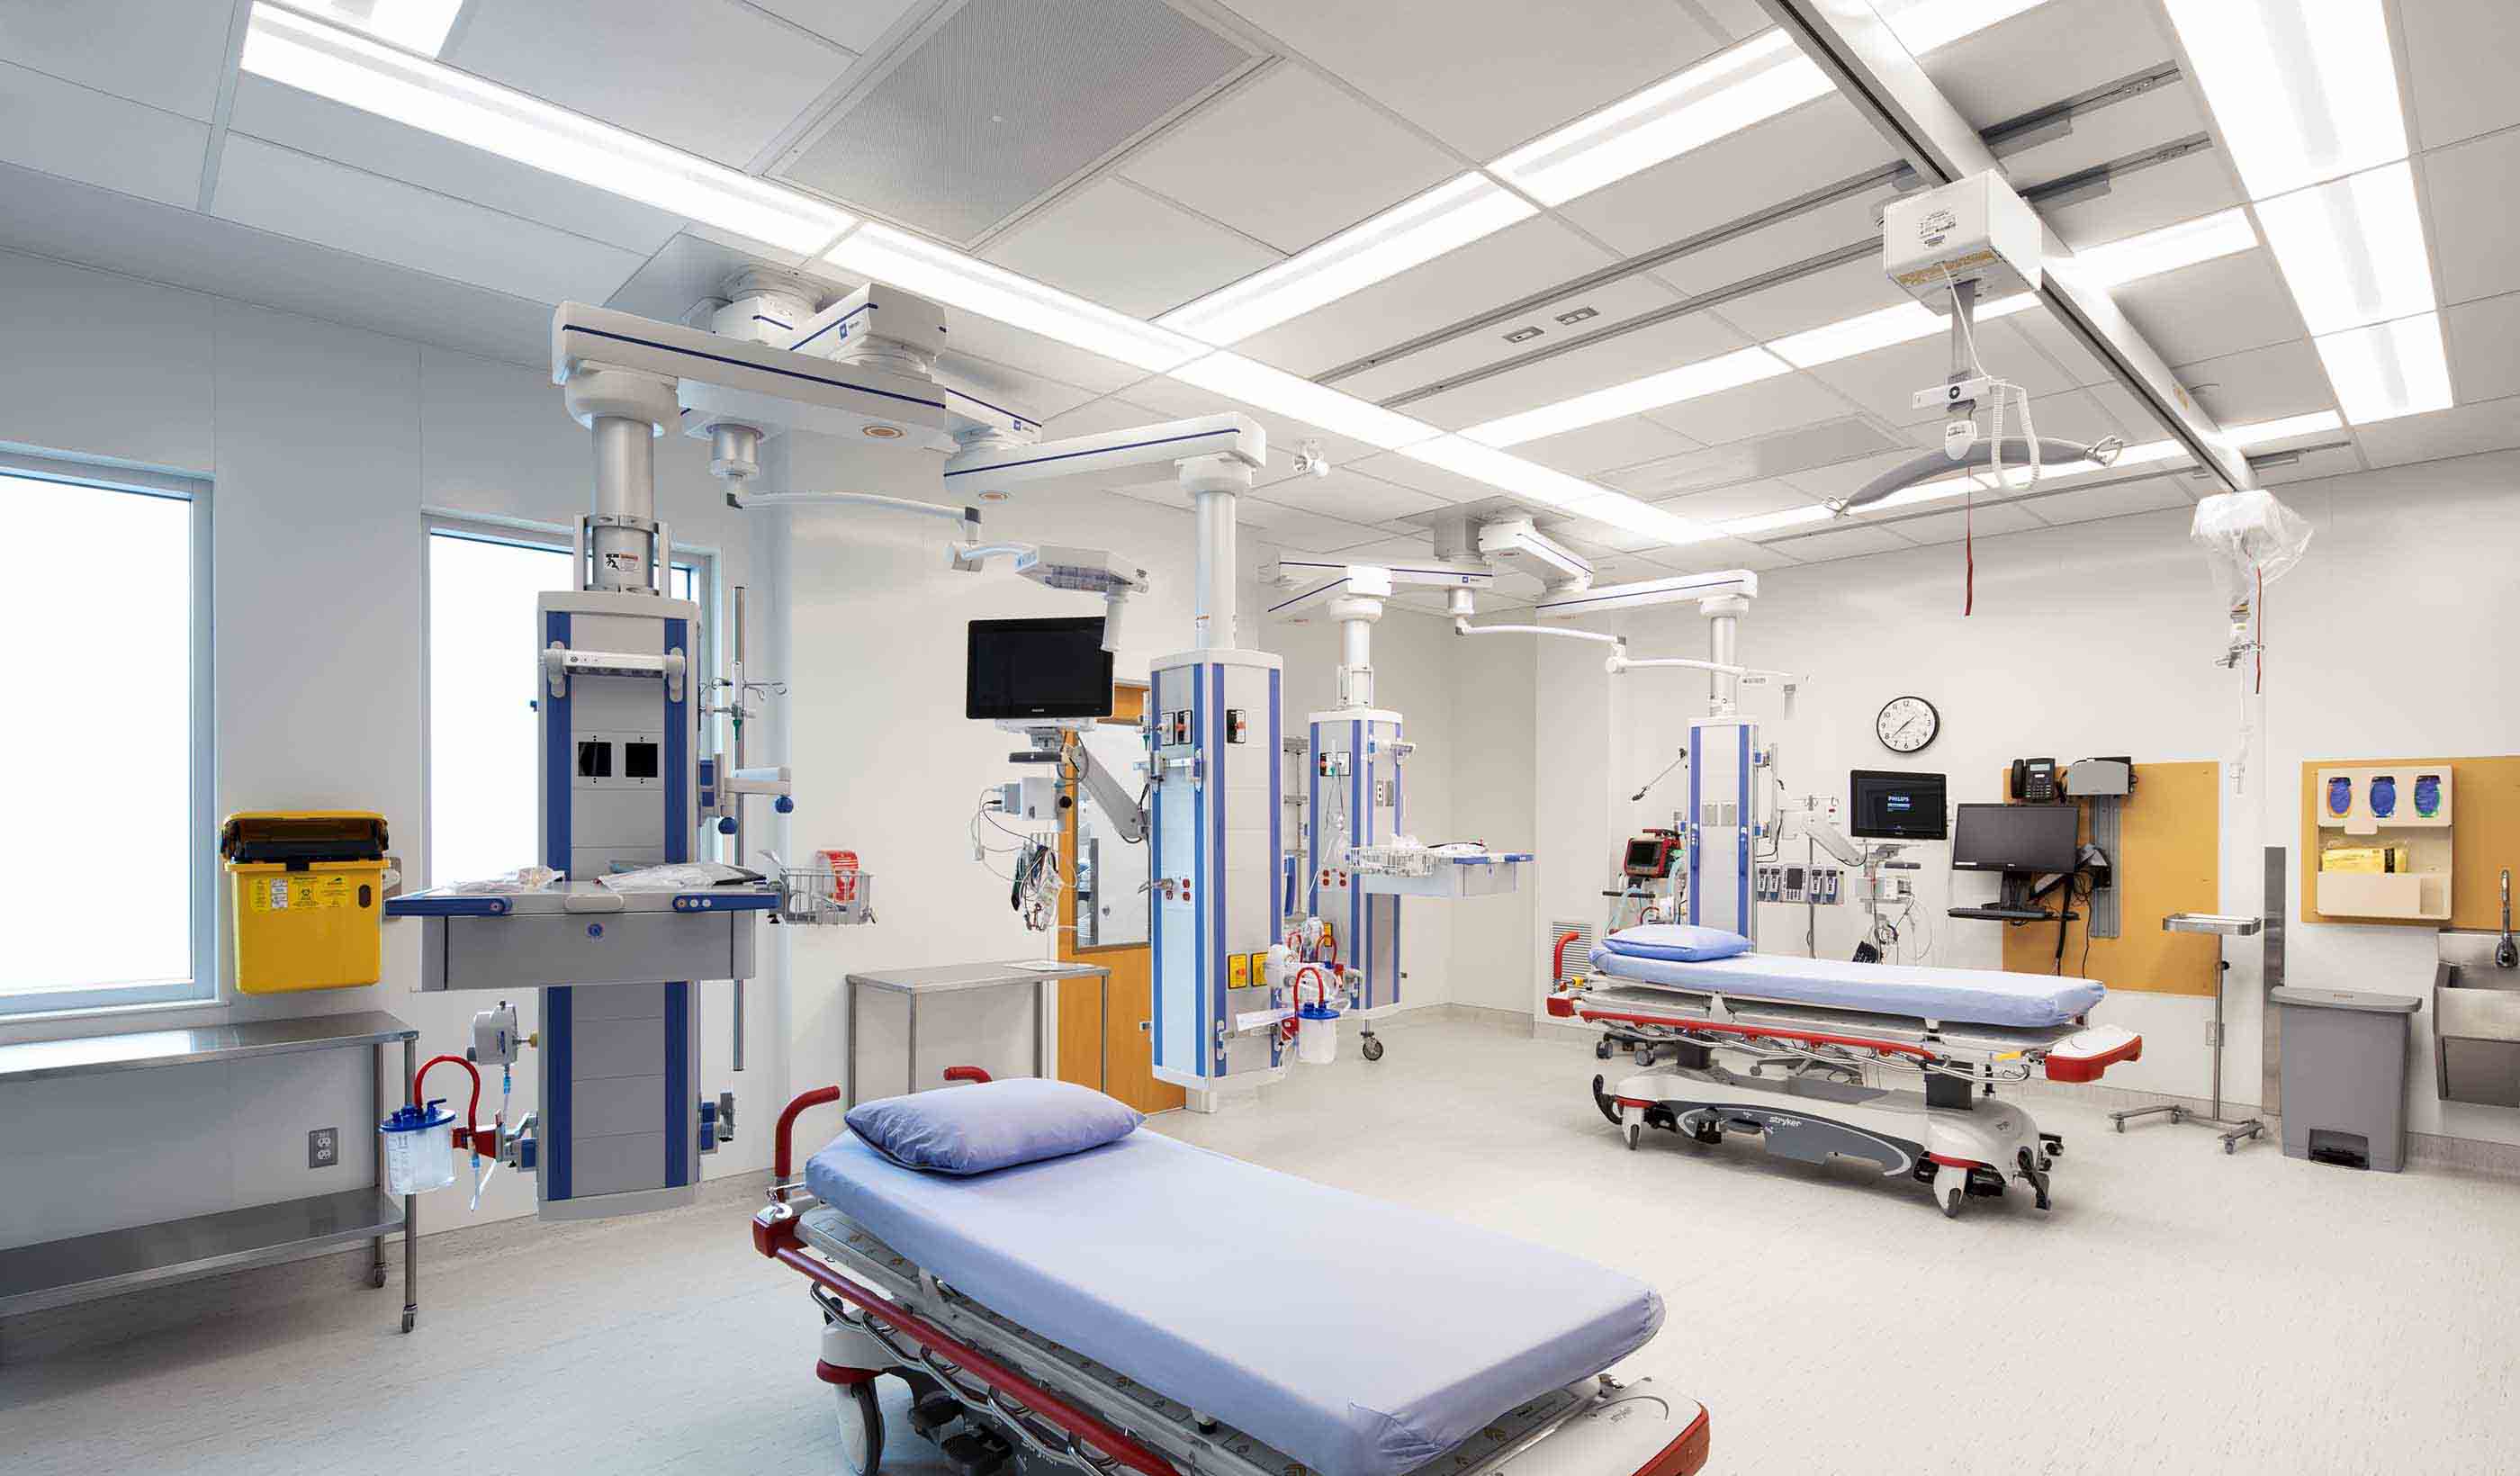 Why decarbonizing hospitals smartly is better than electrification for healthcare design